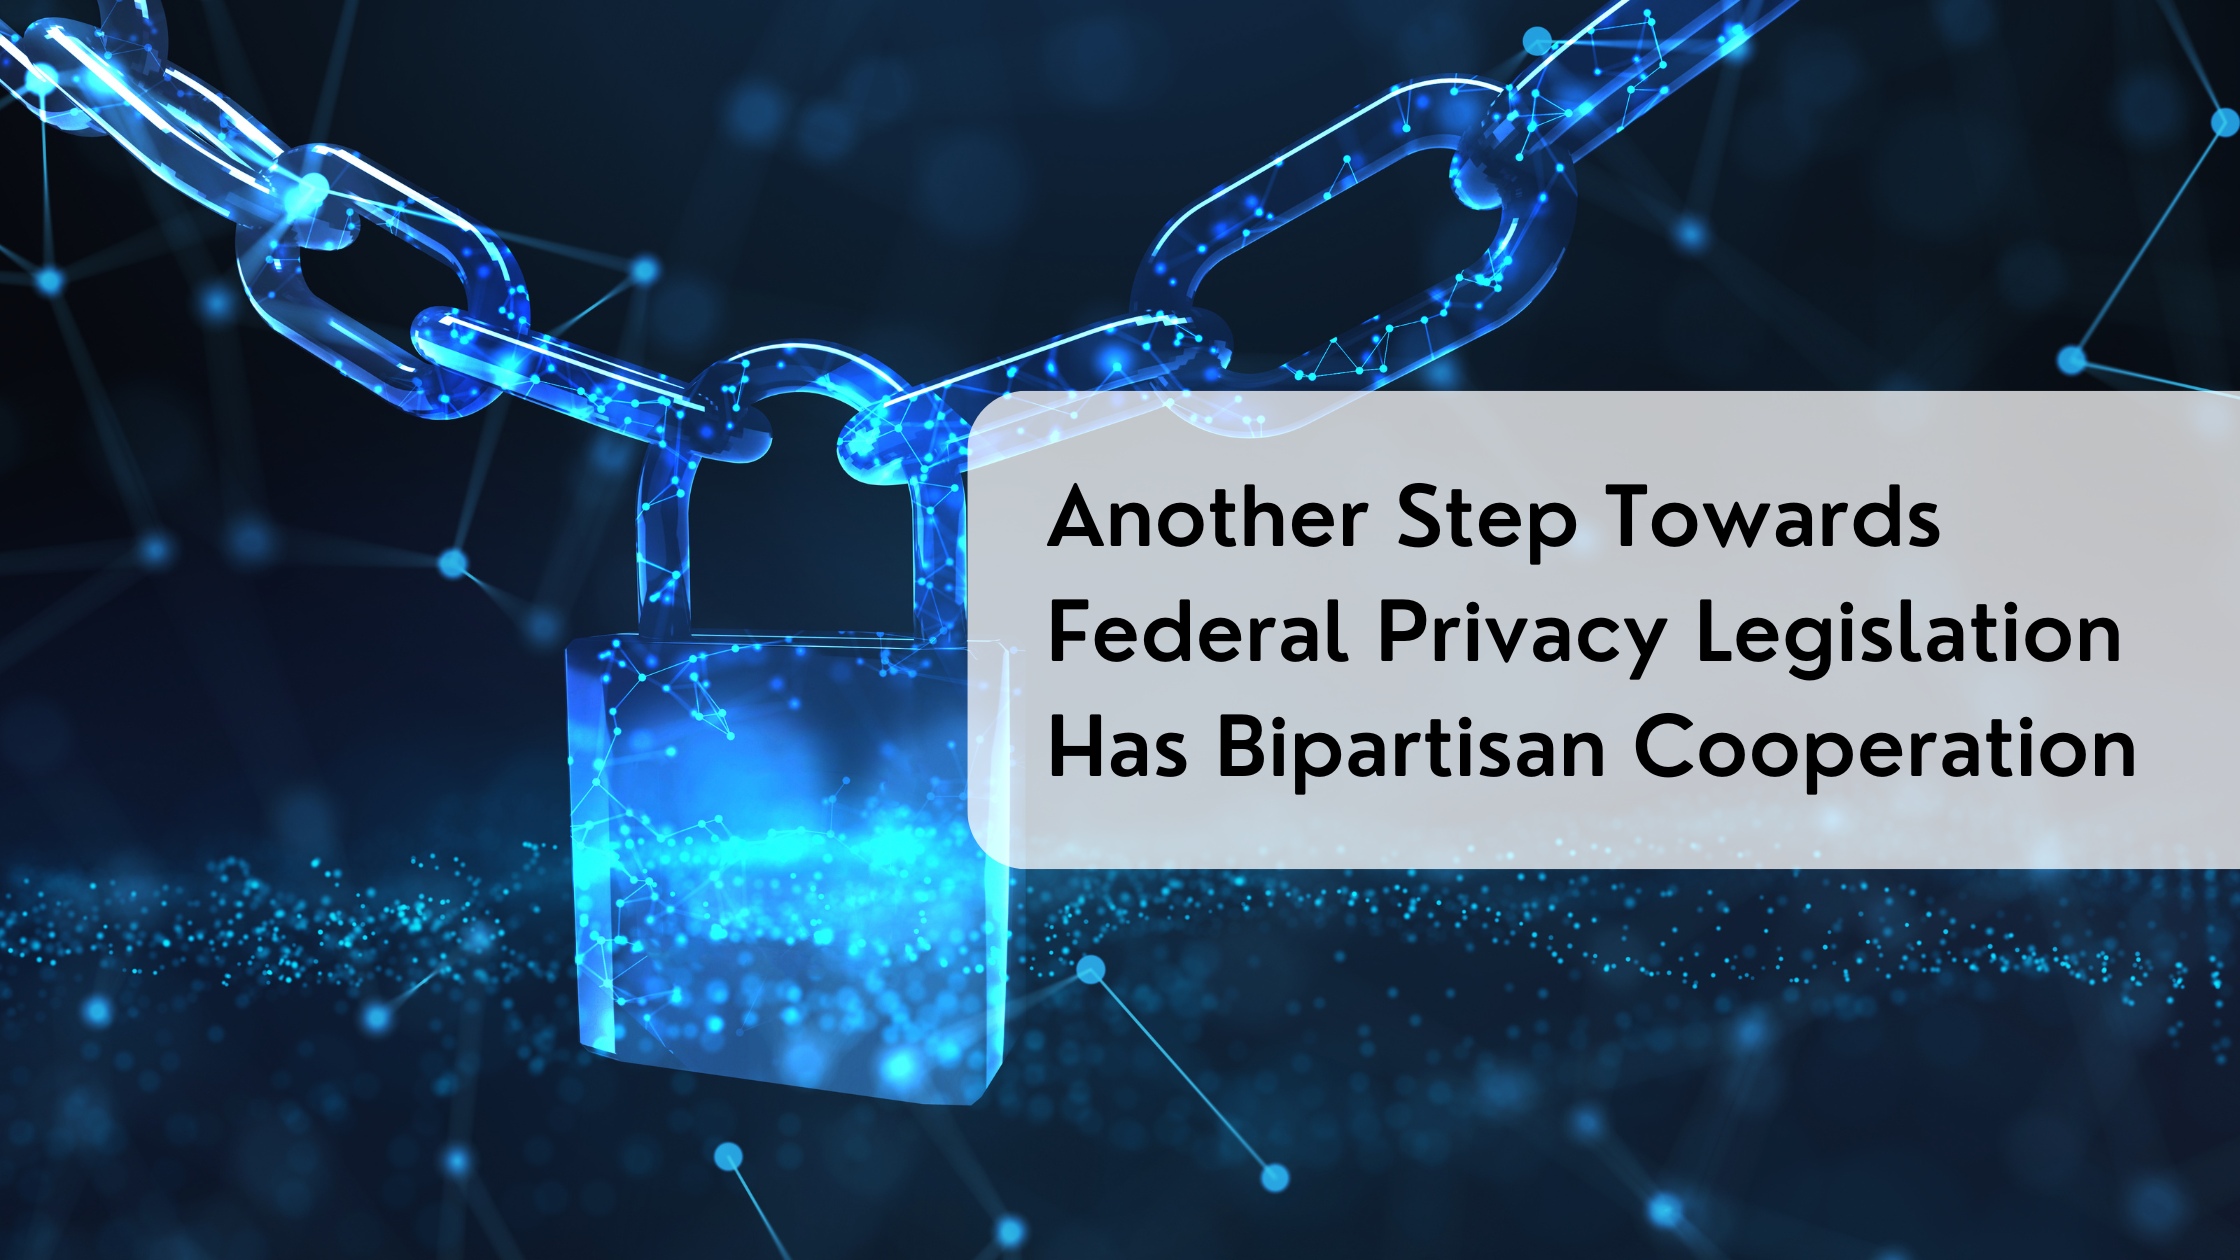 Another Step Towards Federal Privacy Legislation Has Bipartisan Cooperation